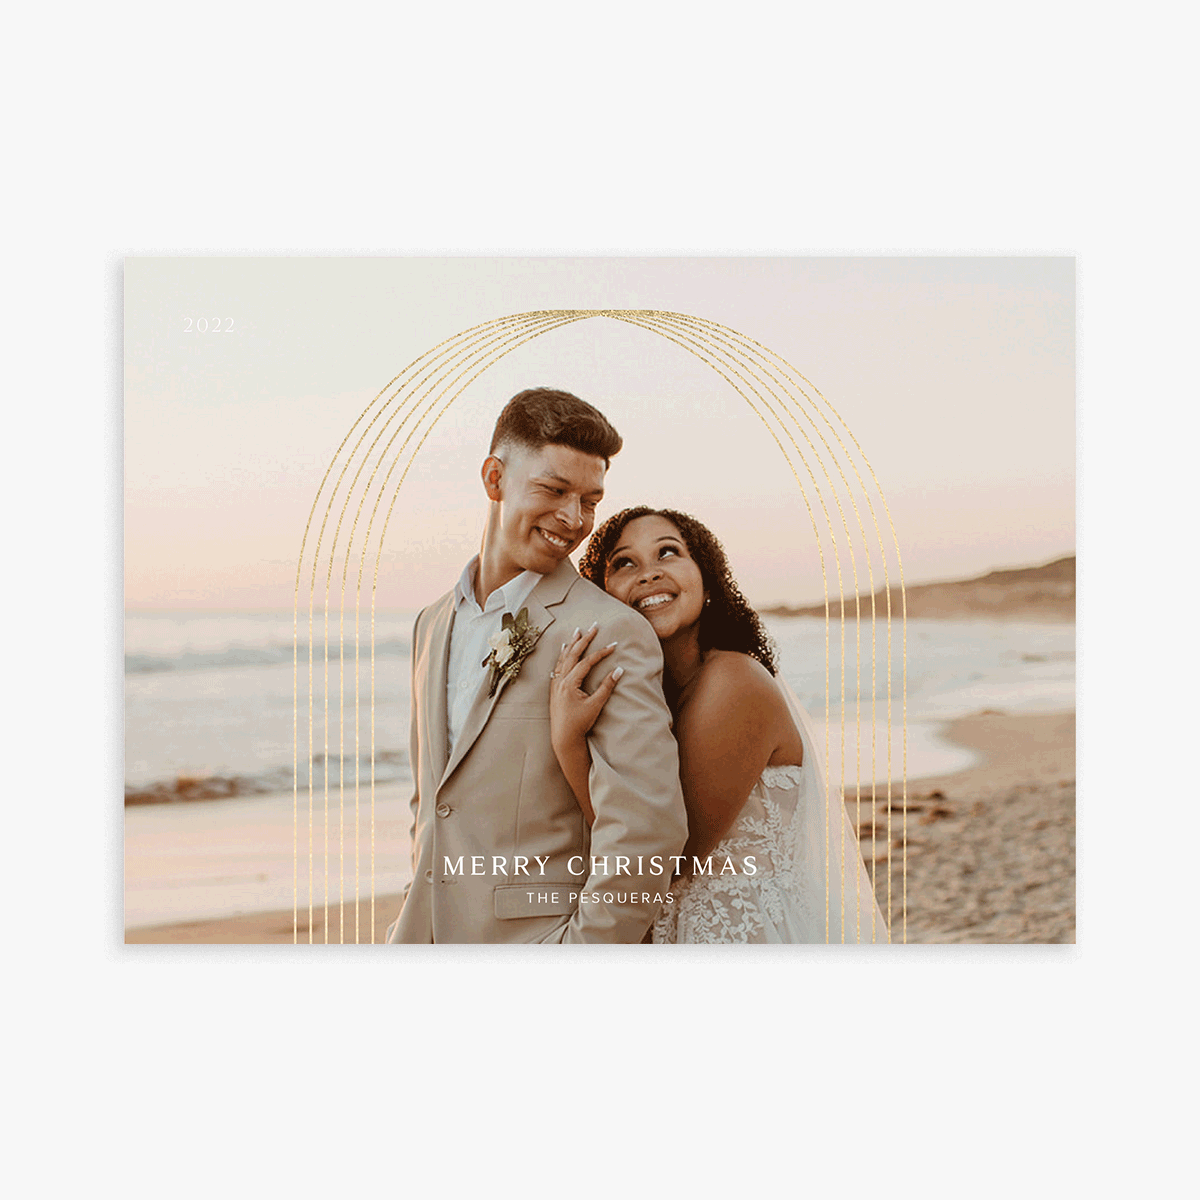 Four Artifact Uprising Holiday Cards alternate with the same wedding photos inside